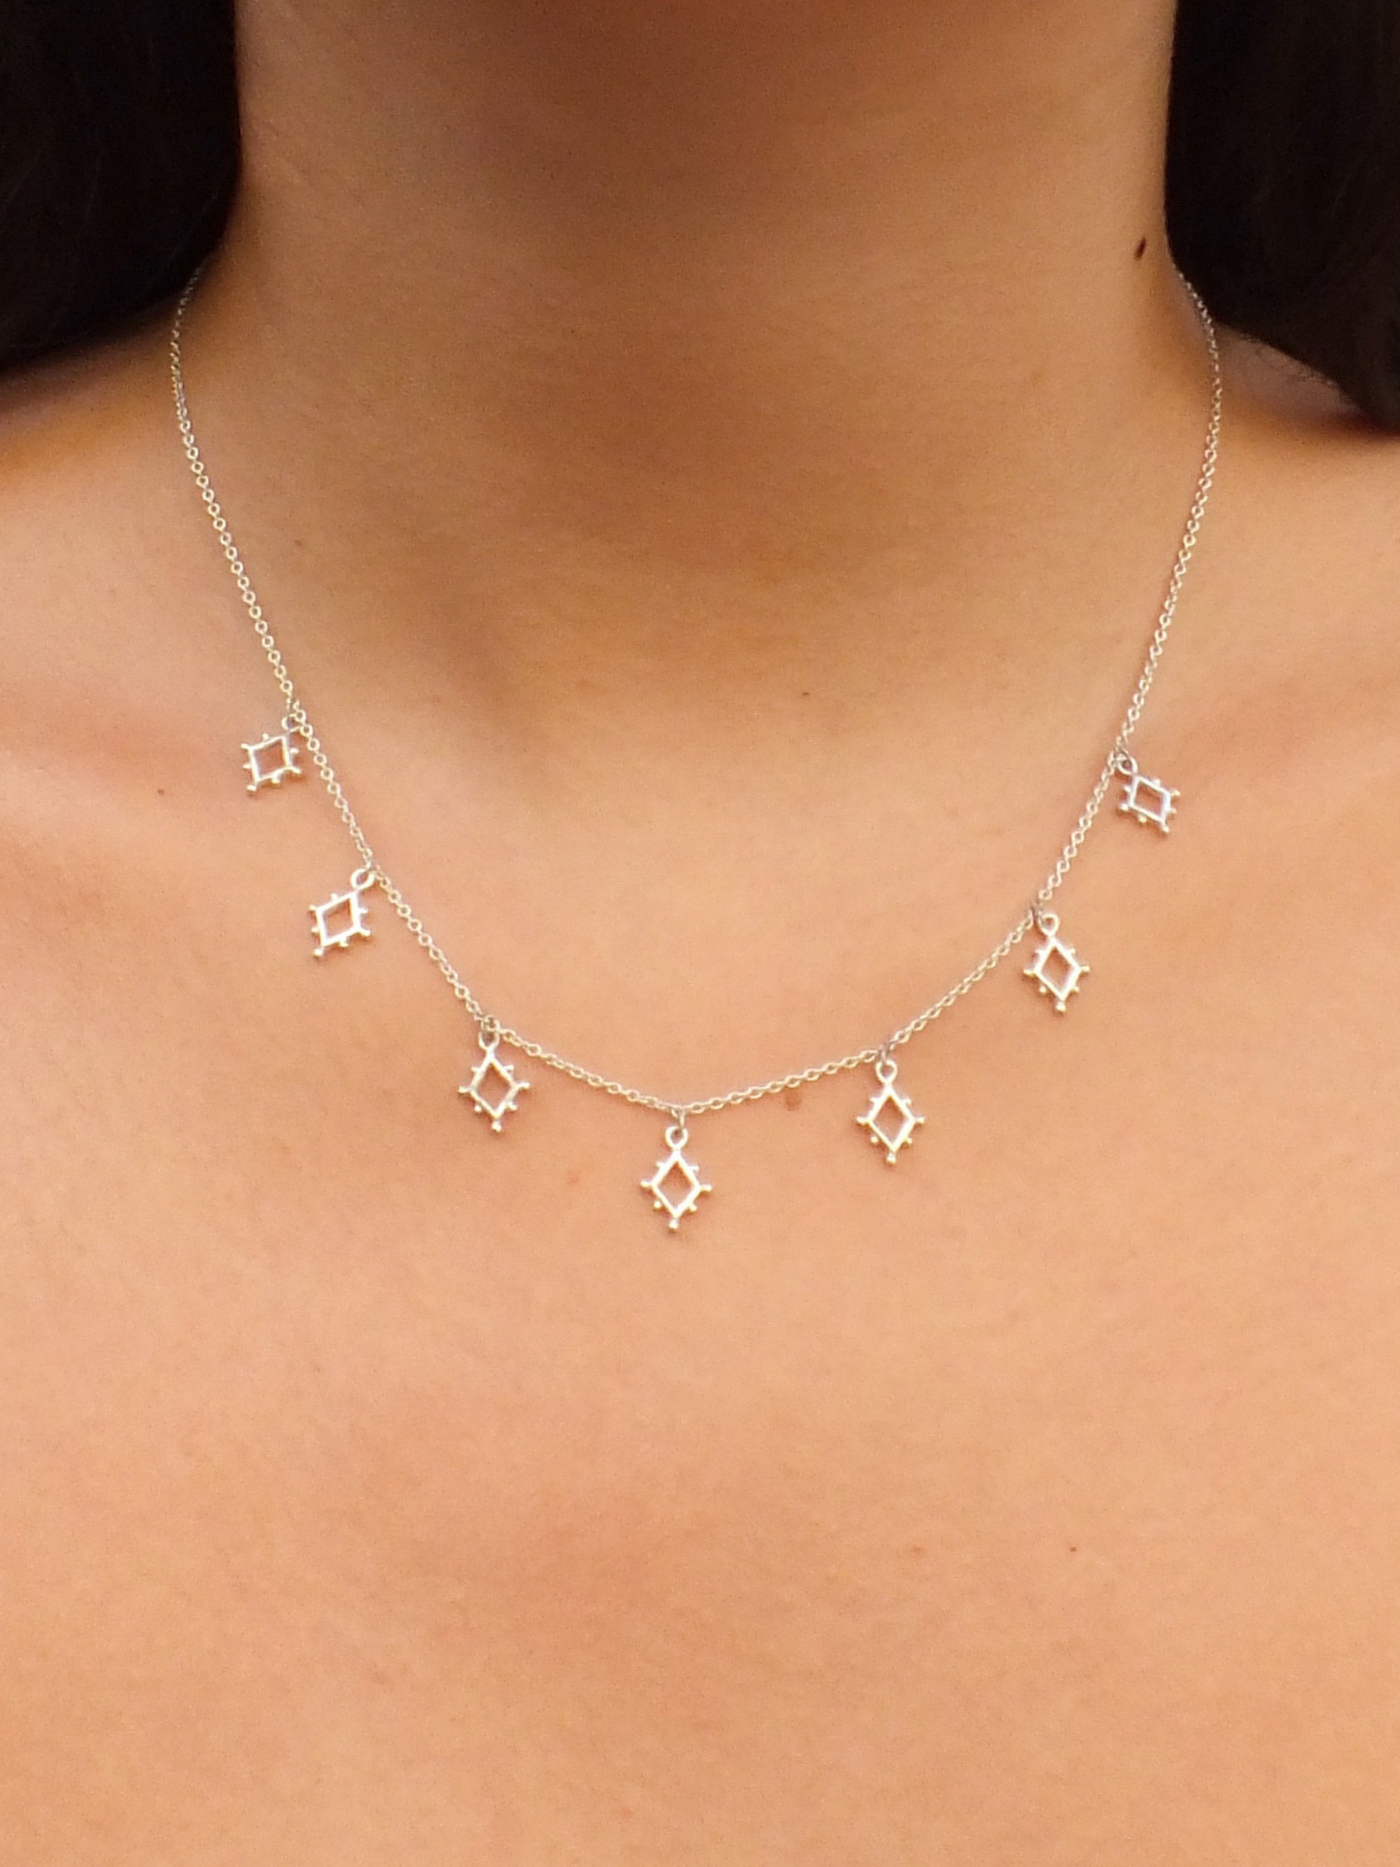 Etruscan Necklace in Sterling Silver